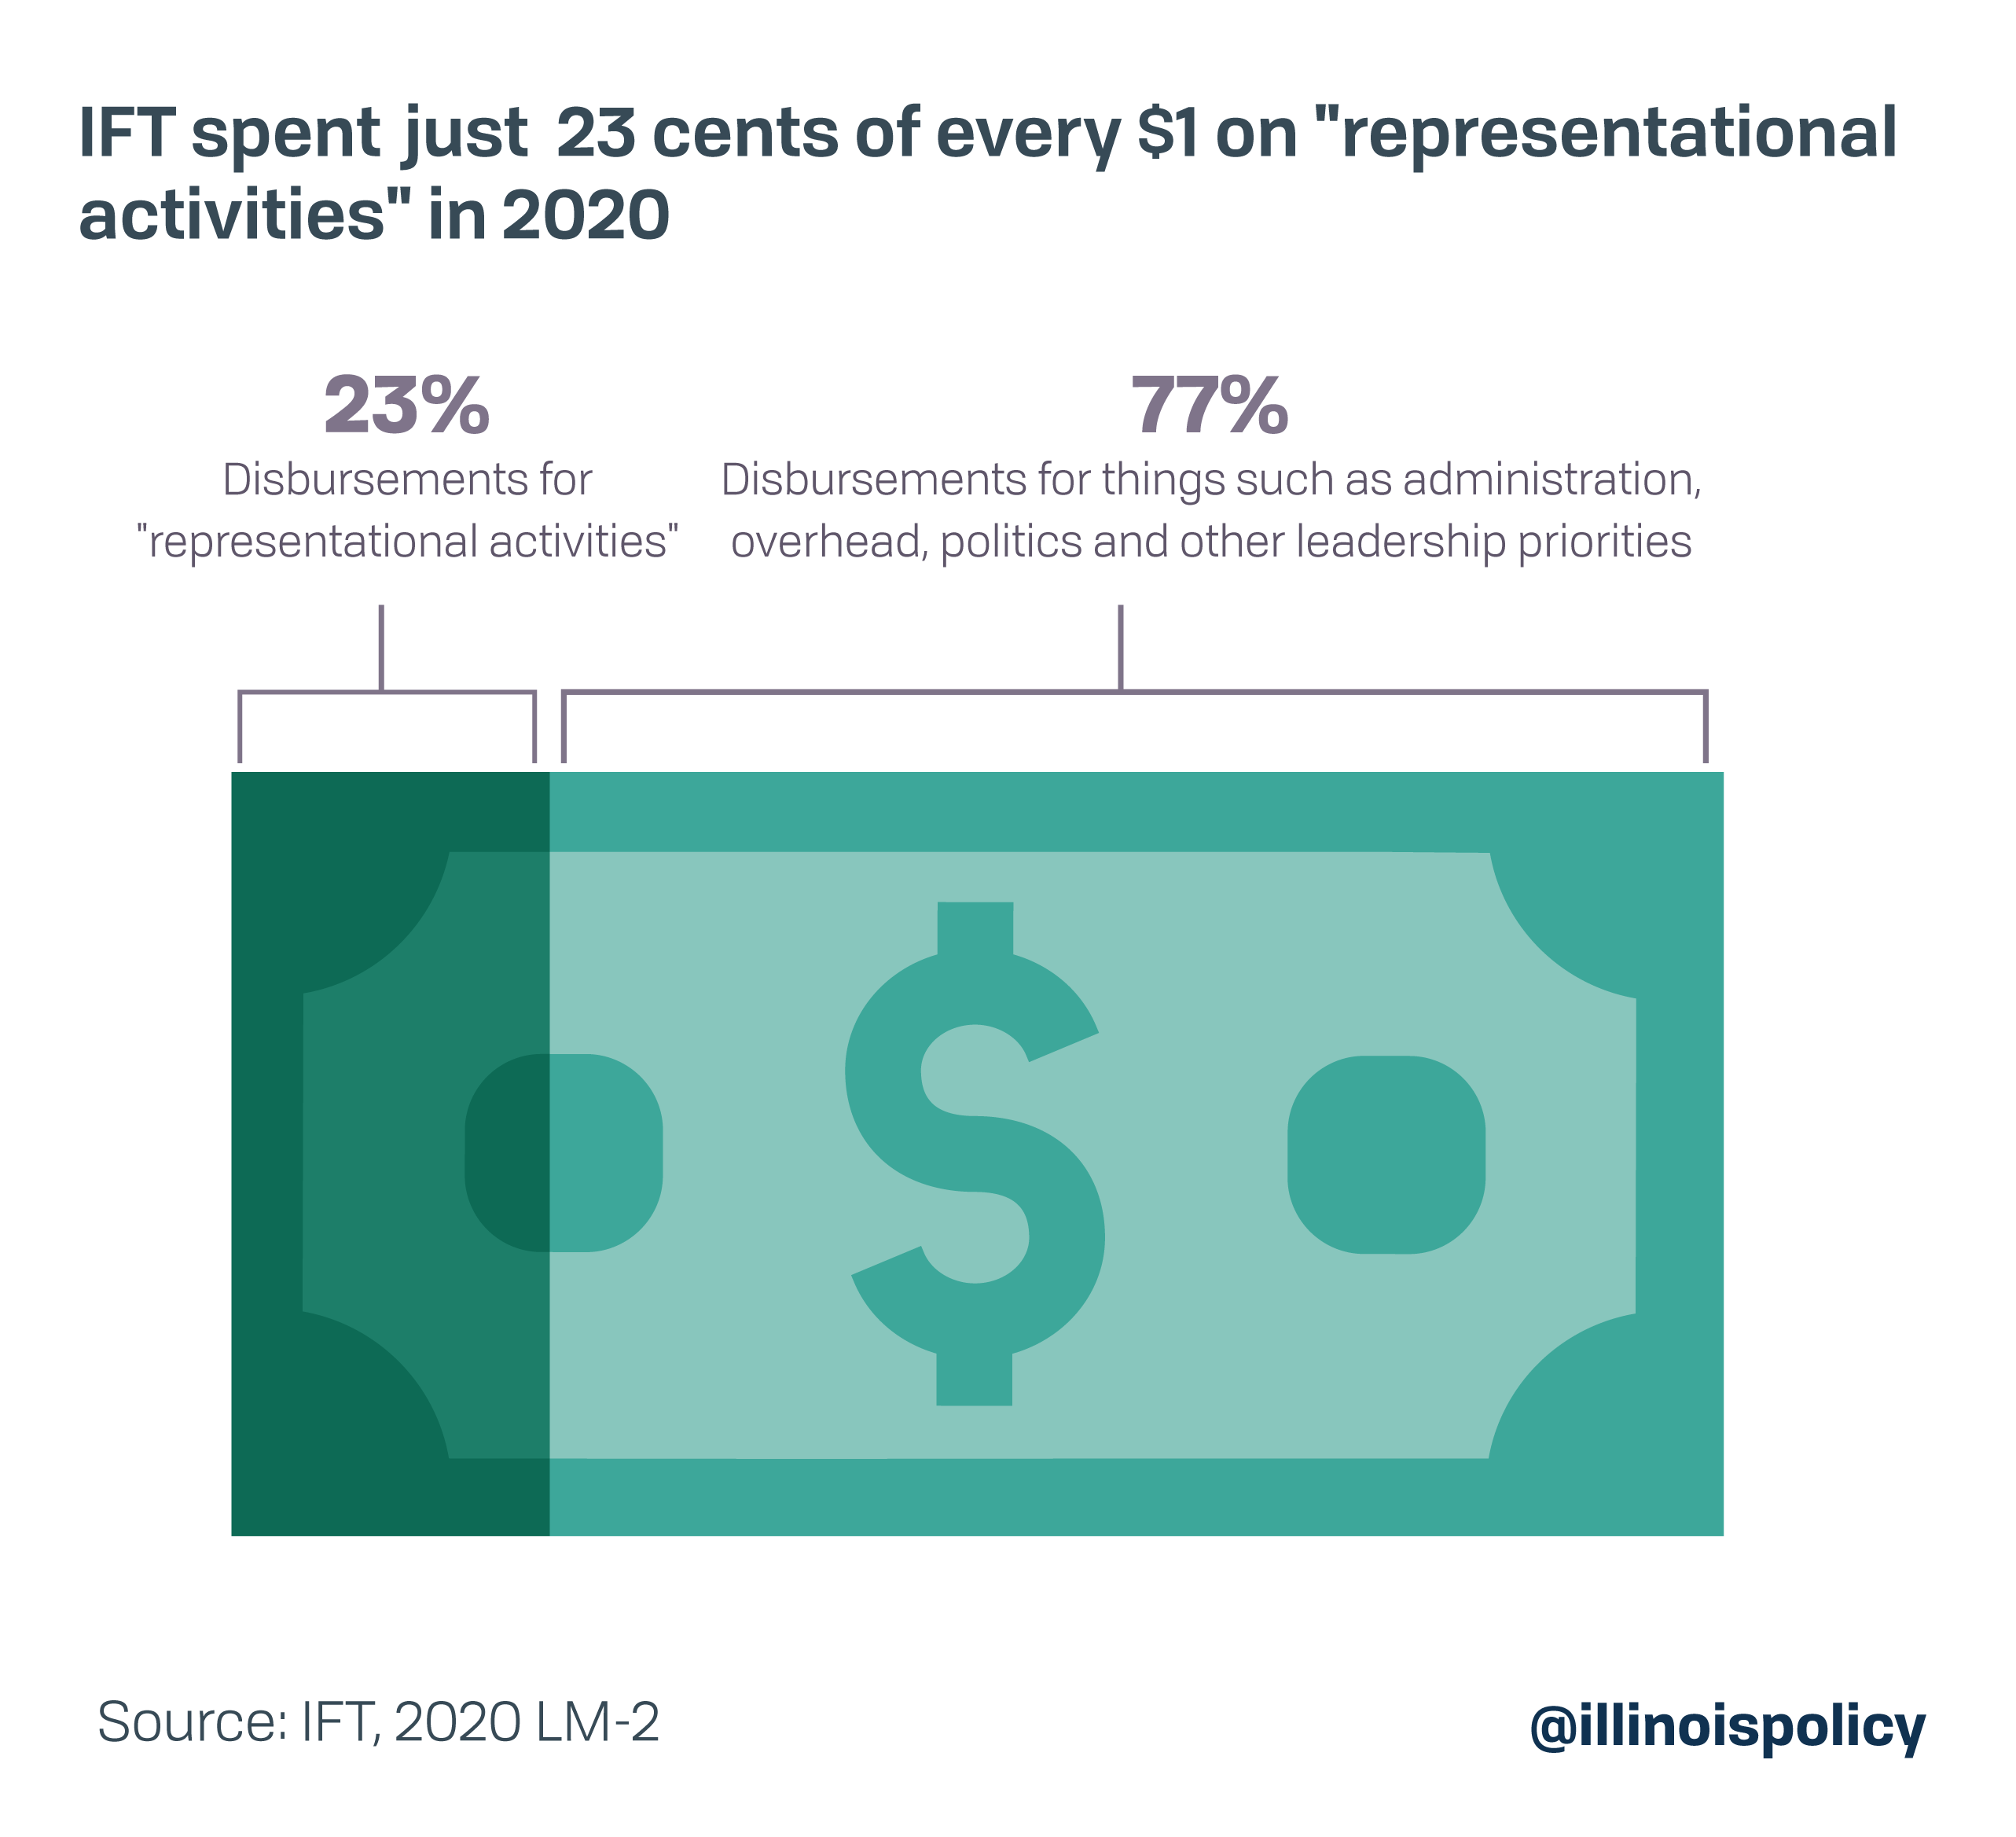 IFT spent just 23 cents of ever $1 on "representational activities" in 2020